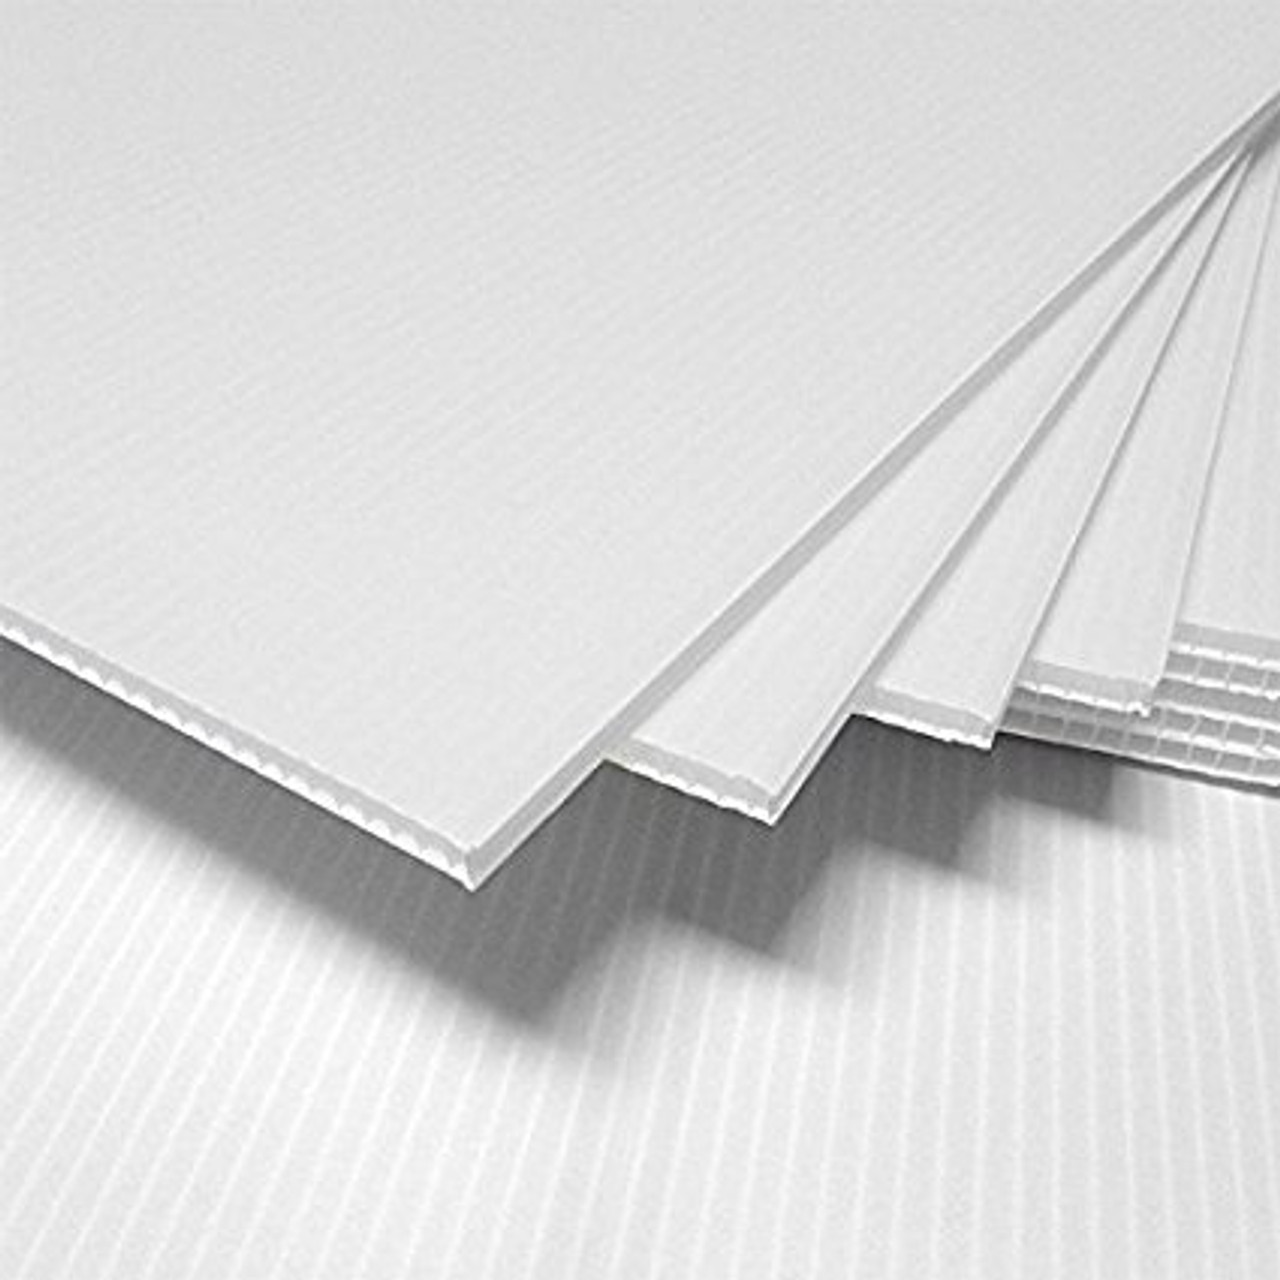 4mm Corrugated plastic sheets 48 X 96 10 Pack 100 Virgin White